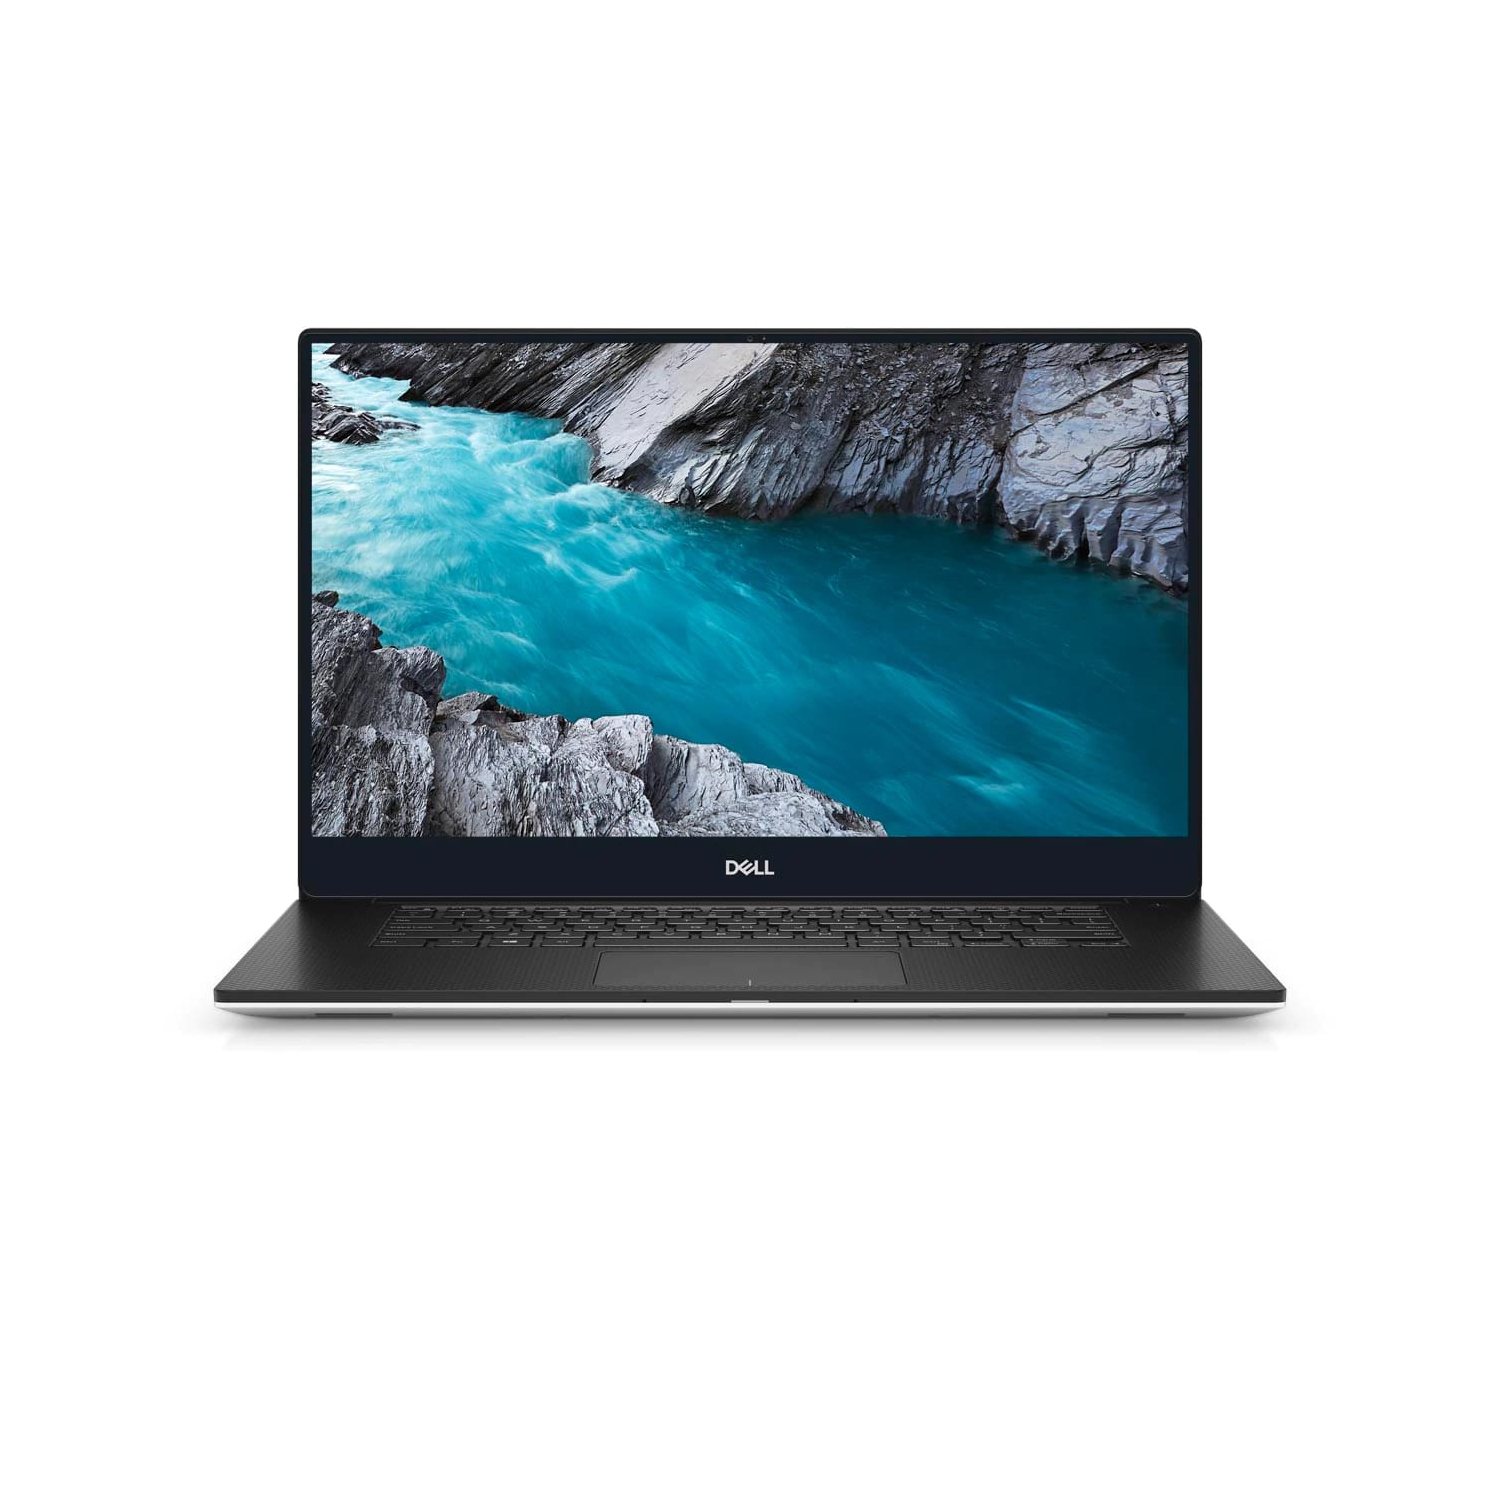 Refurbished (Excellent) - Dell XPS 15 7590 Laptop (2019) | 15.6" 4K Touch | Core i9 - 1TB SSD - 32GB RAM - GTX 1650 | 8 Cores @ 5 GHz Certified Refurbished